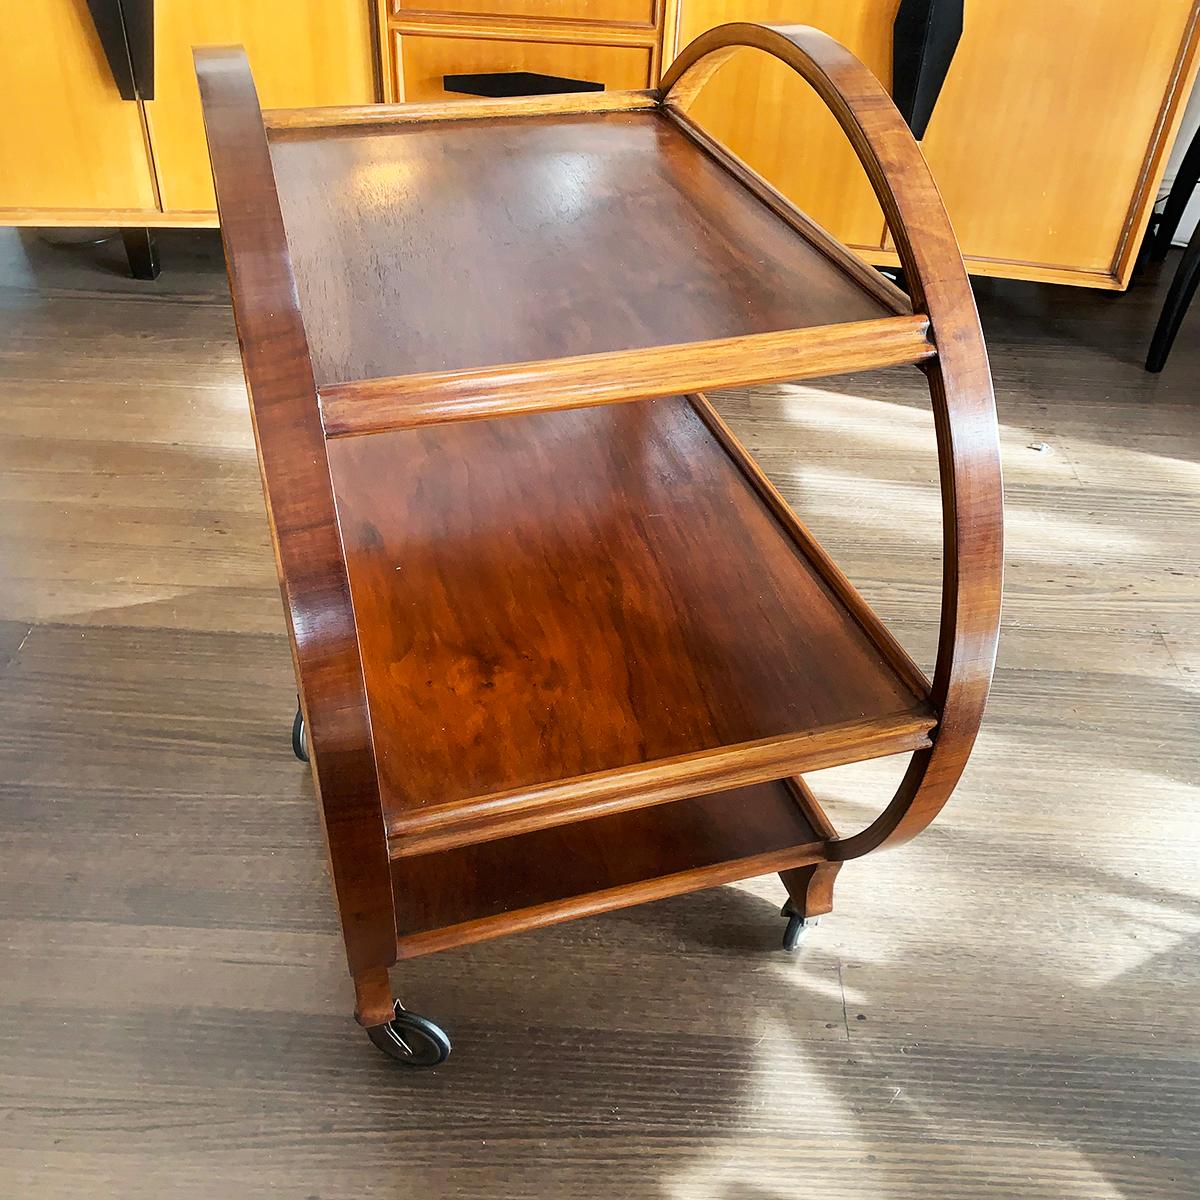 Art Deco Savoy bentwood, cocktail or tea trolley. Great, geometric design with three-tray levels and full circle bentwood support / handles. This has been completely restored by our French Polishers. These are becoming very scarce, and are